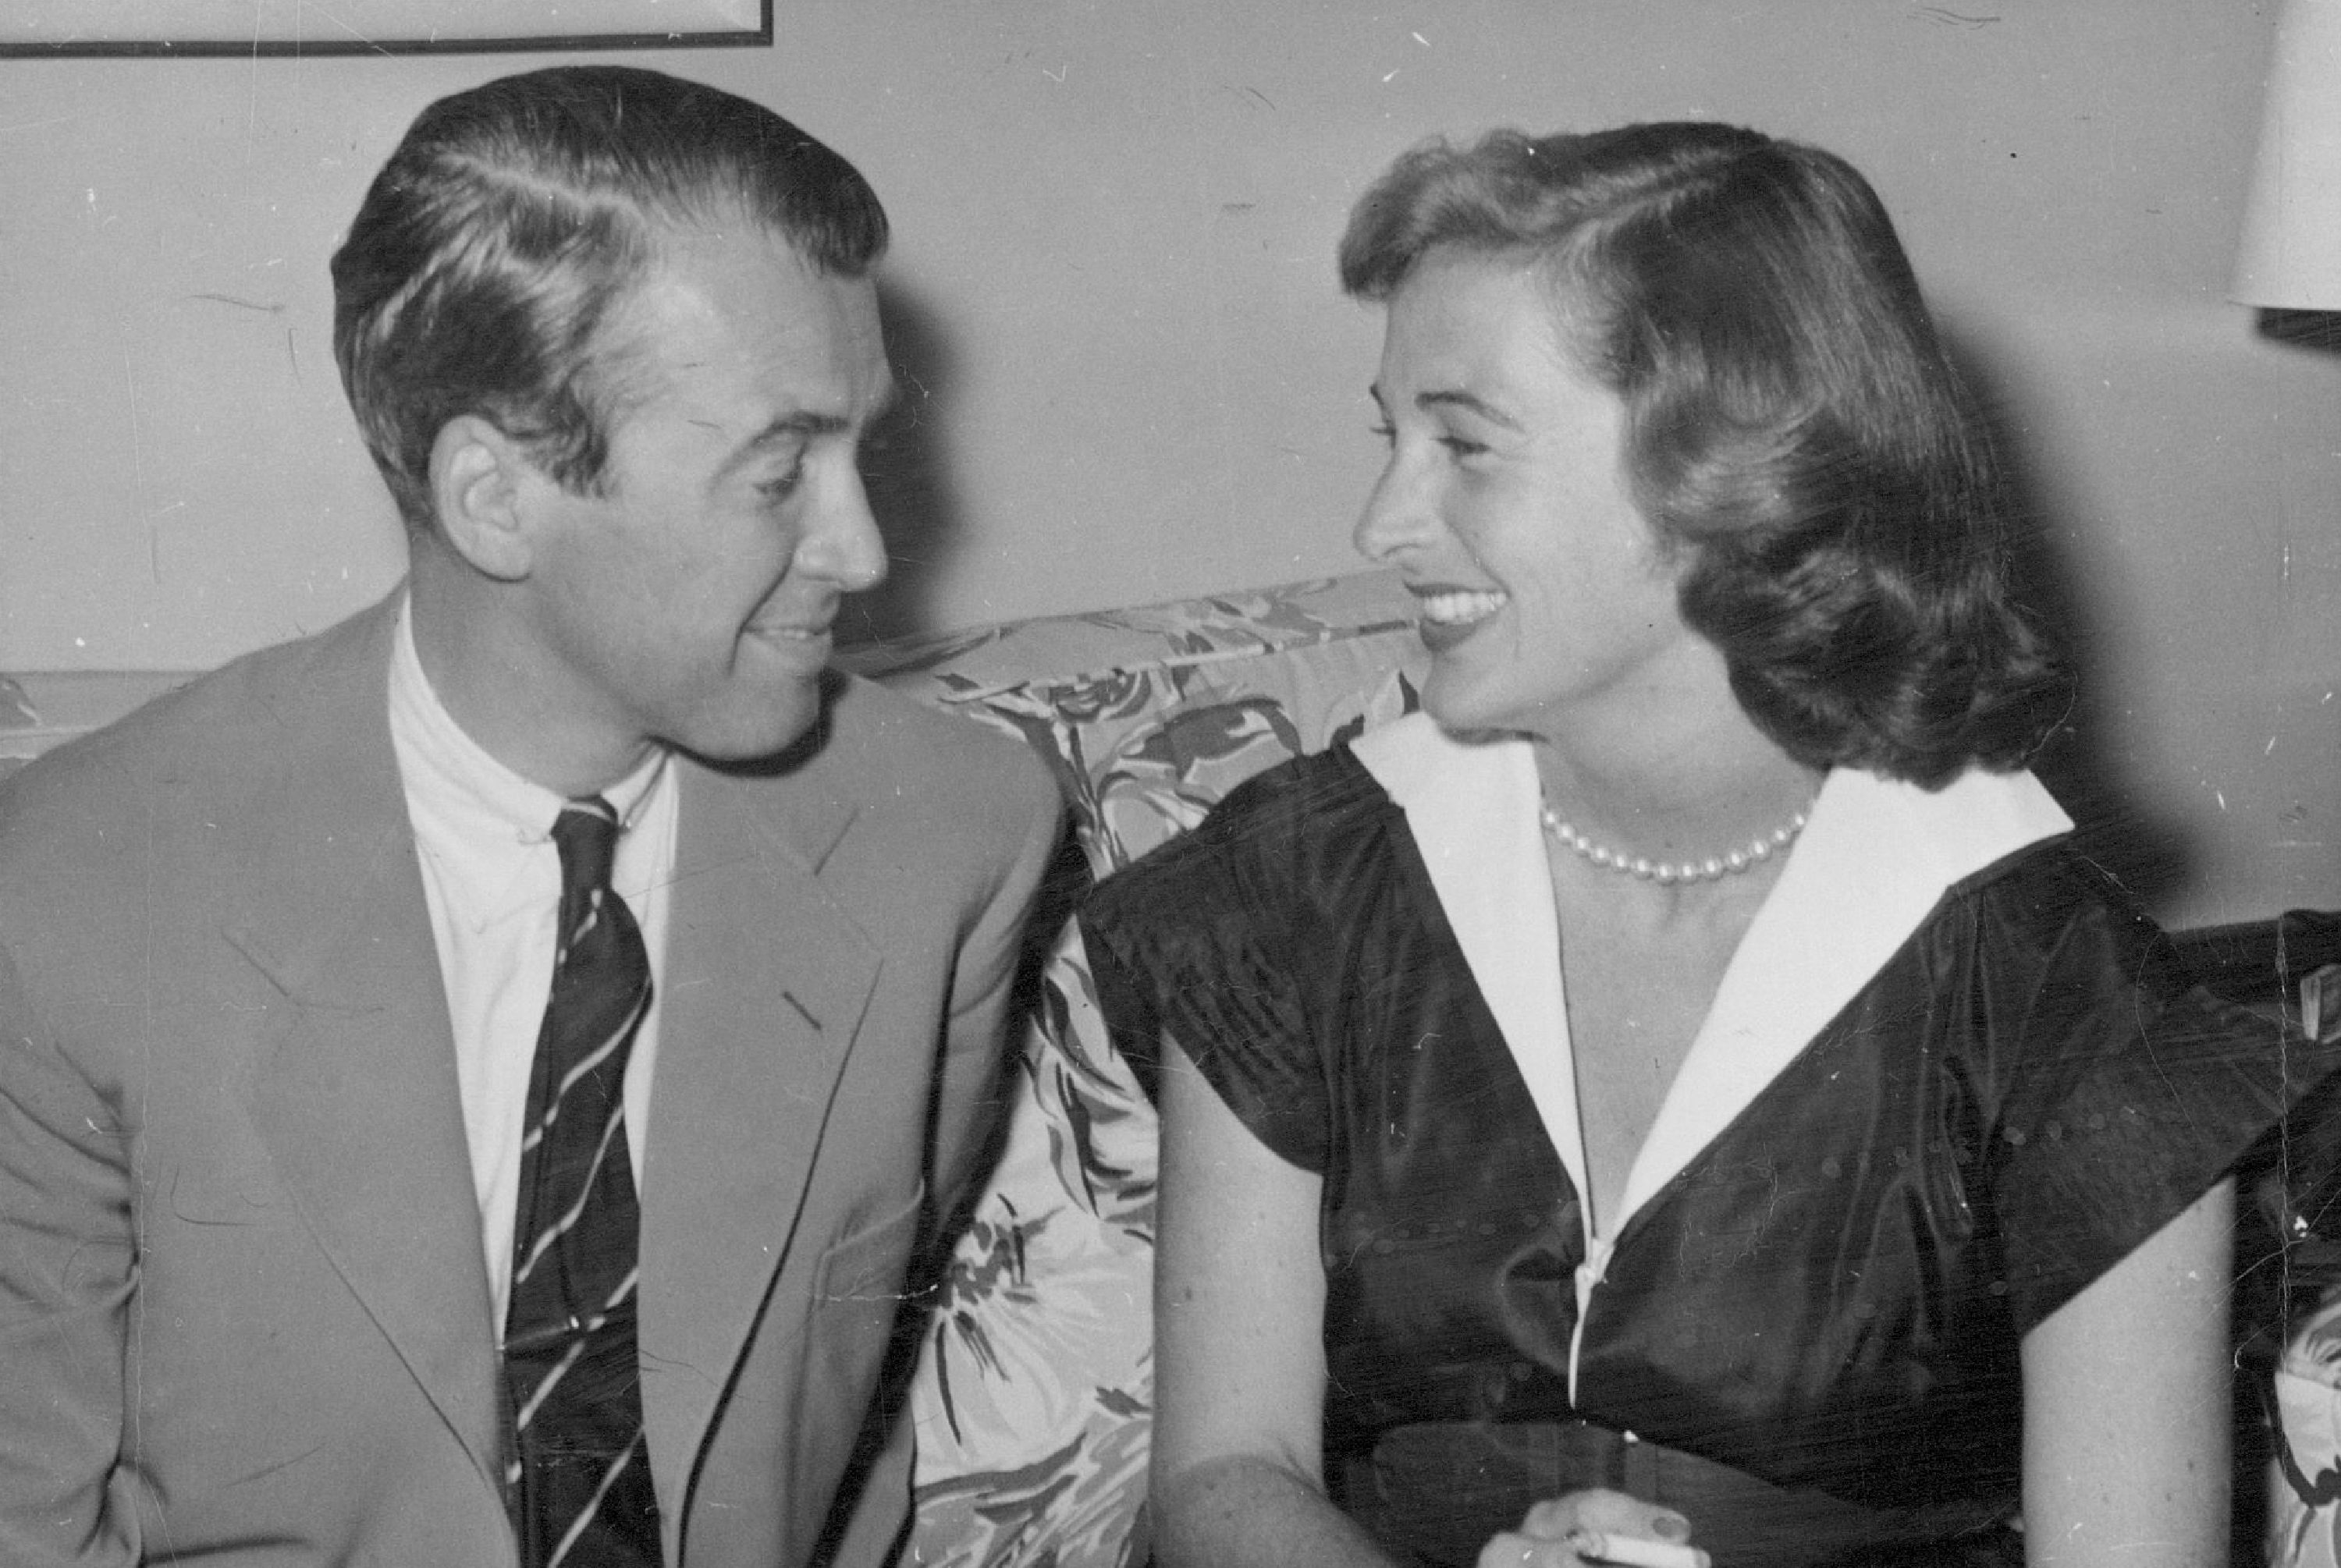 James Stewart and Gloria Hatrick McLean at the Broadmoor hotel, Colorado Springs on August 17, 1949 | Source: Getty Images